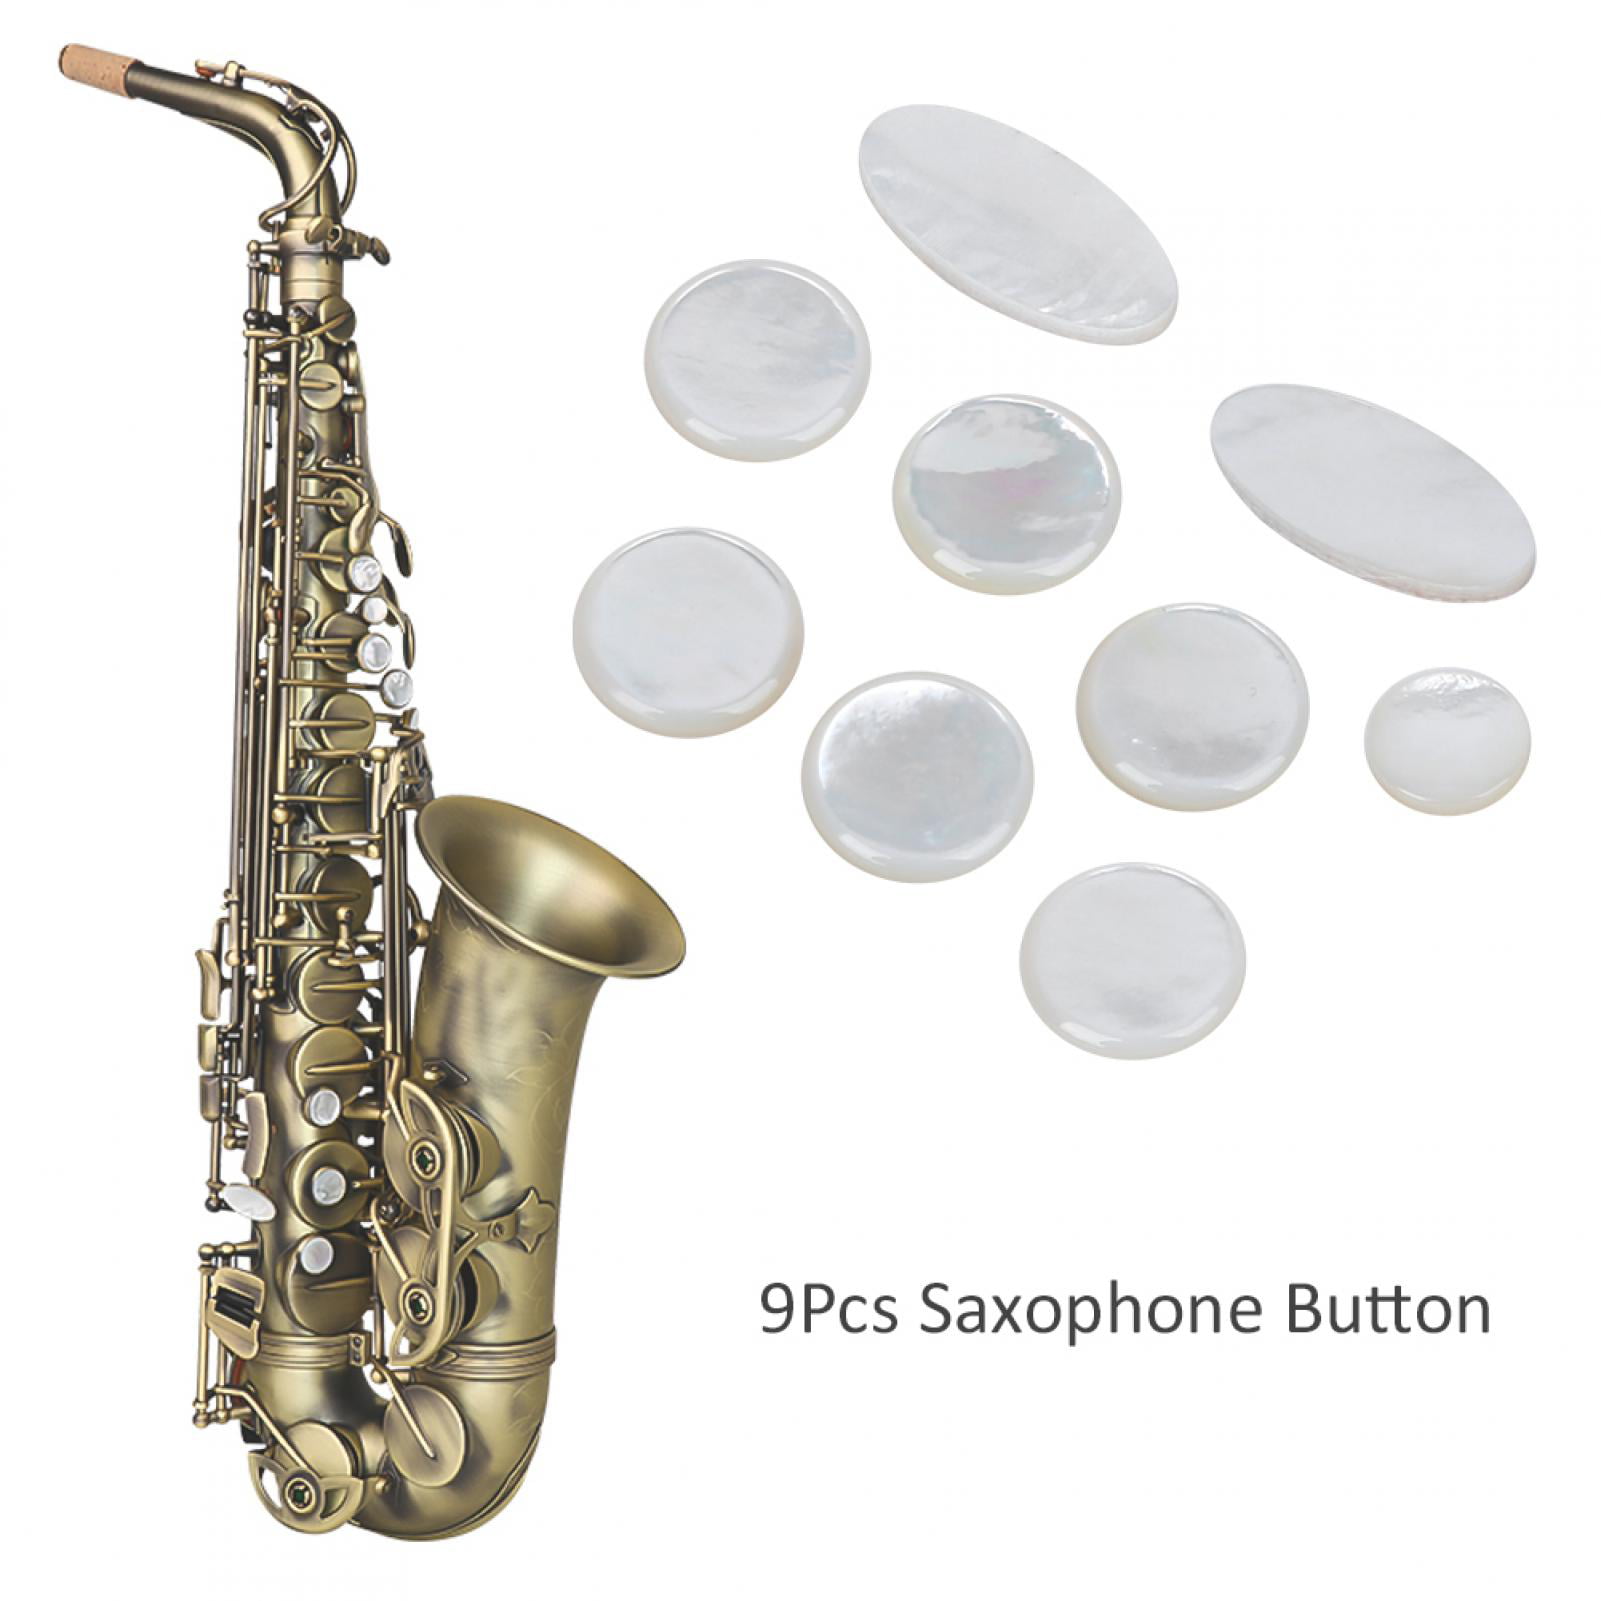 Good-looking Unfading Saxophone Button For Saxophone 